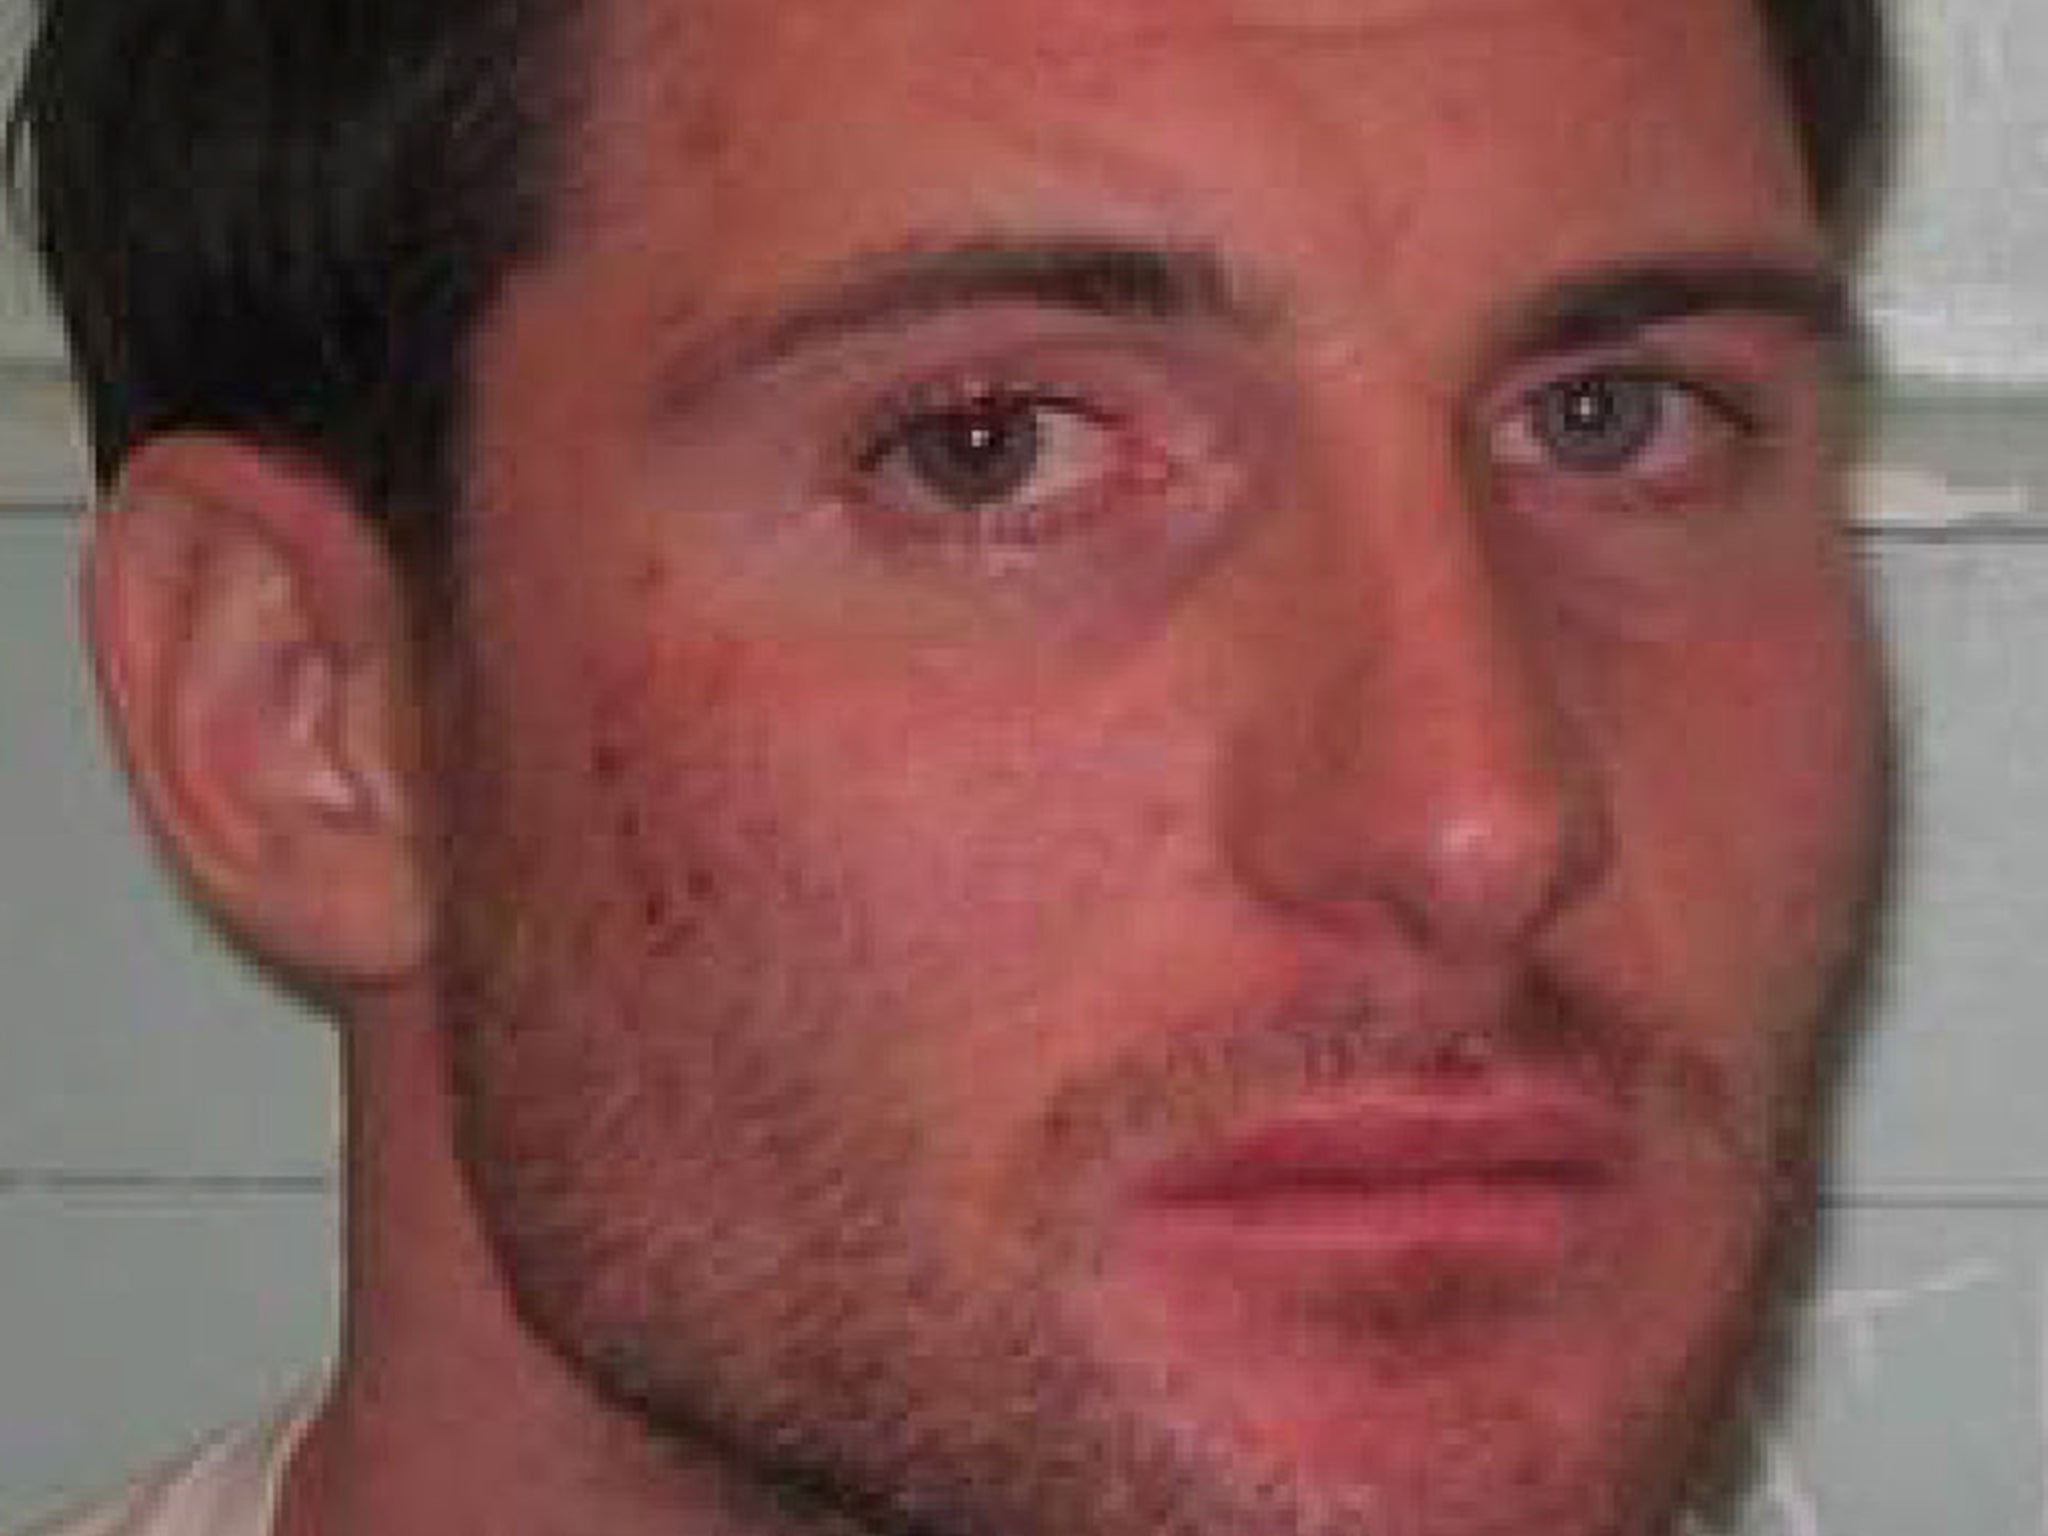 Shane O’Brien, 28, is accused of the murder of Josh Hanson in the RE Bar in Hillingdon, west London